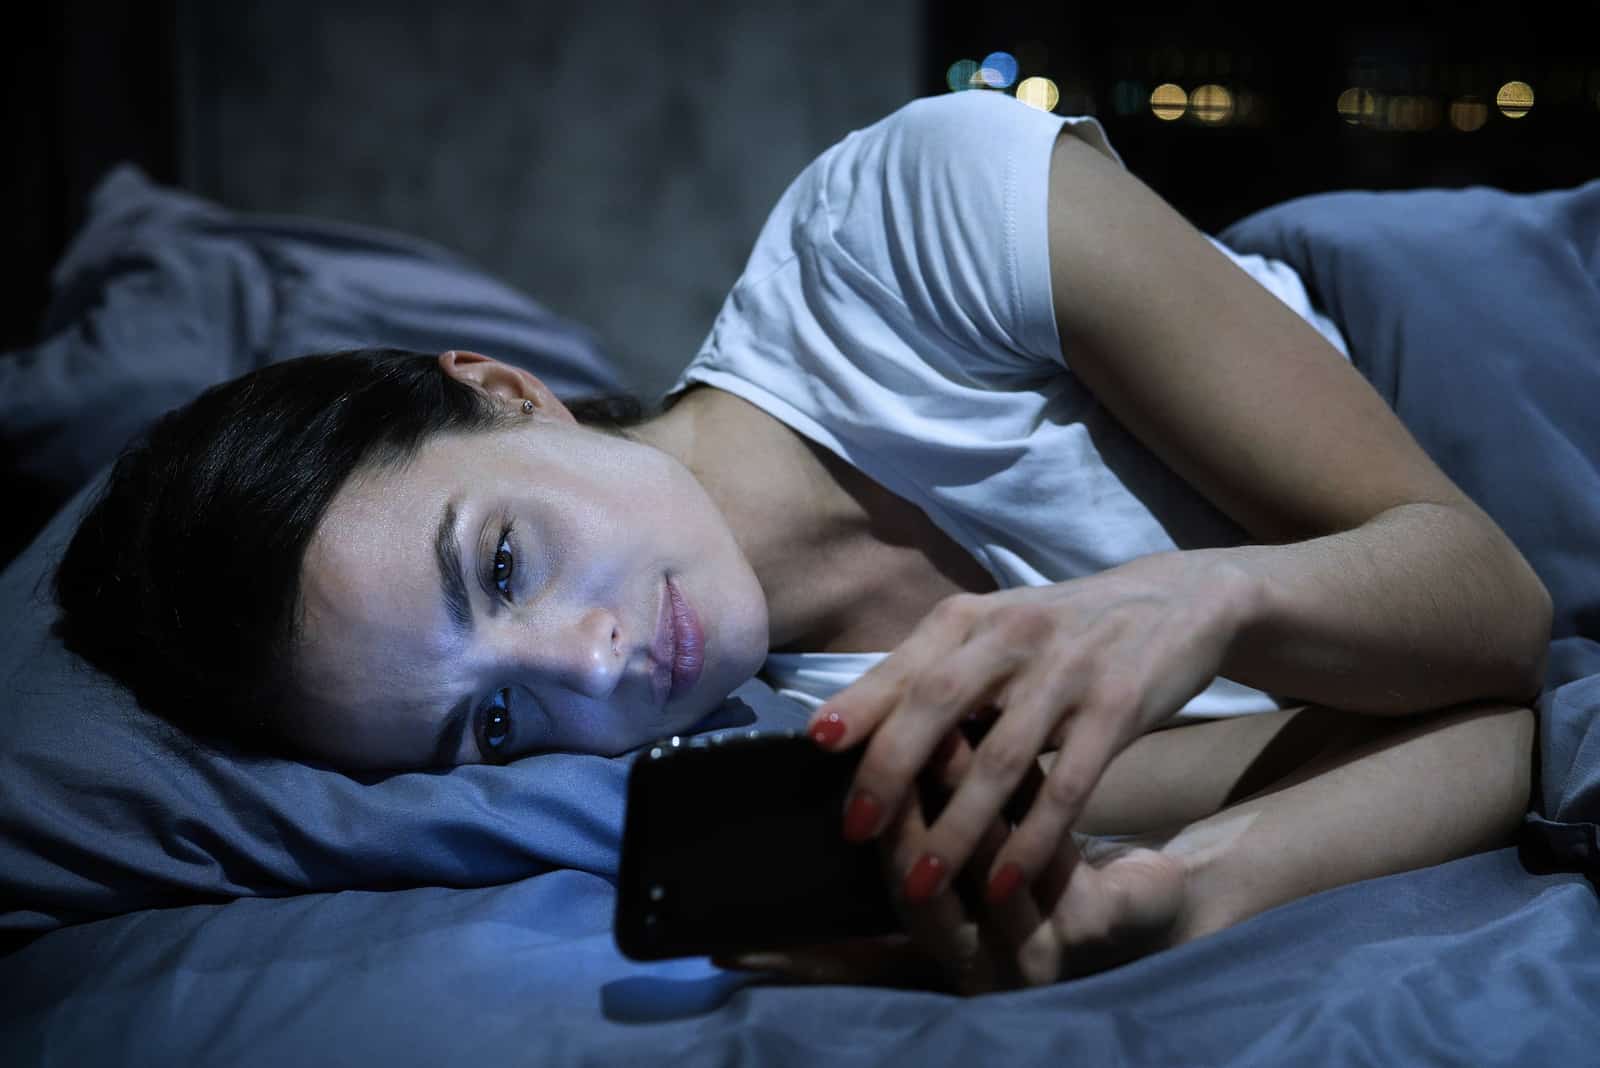 sad girl reading messages in bed